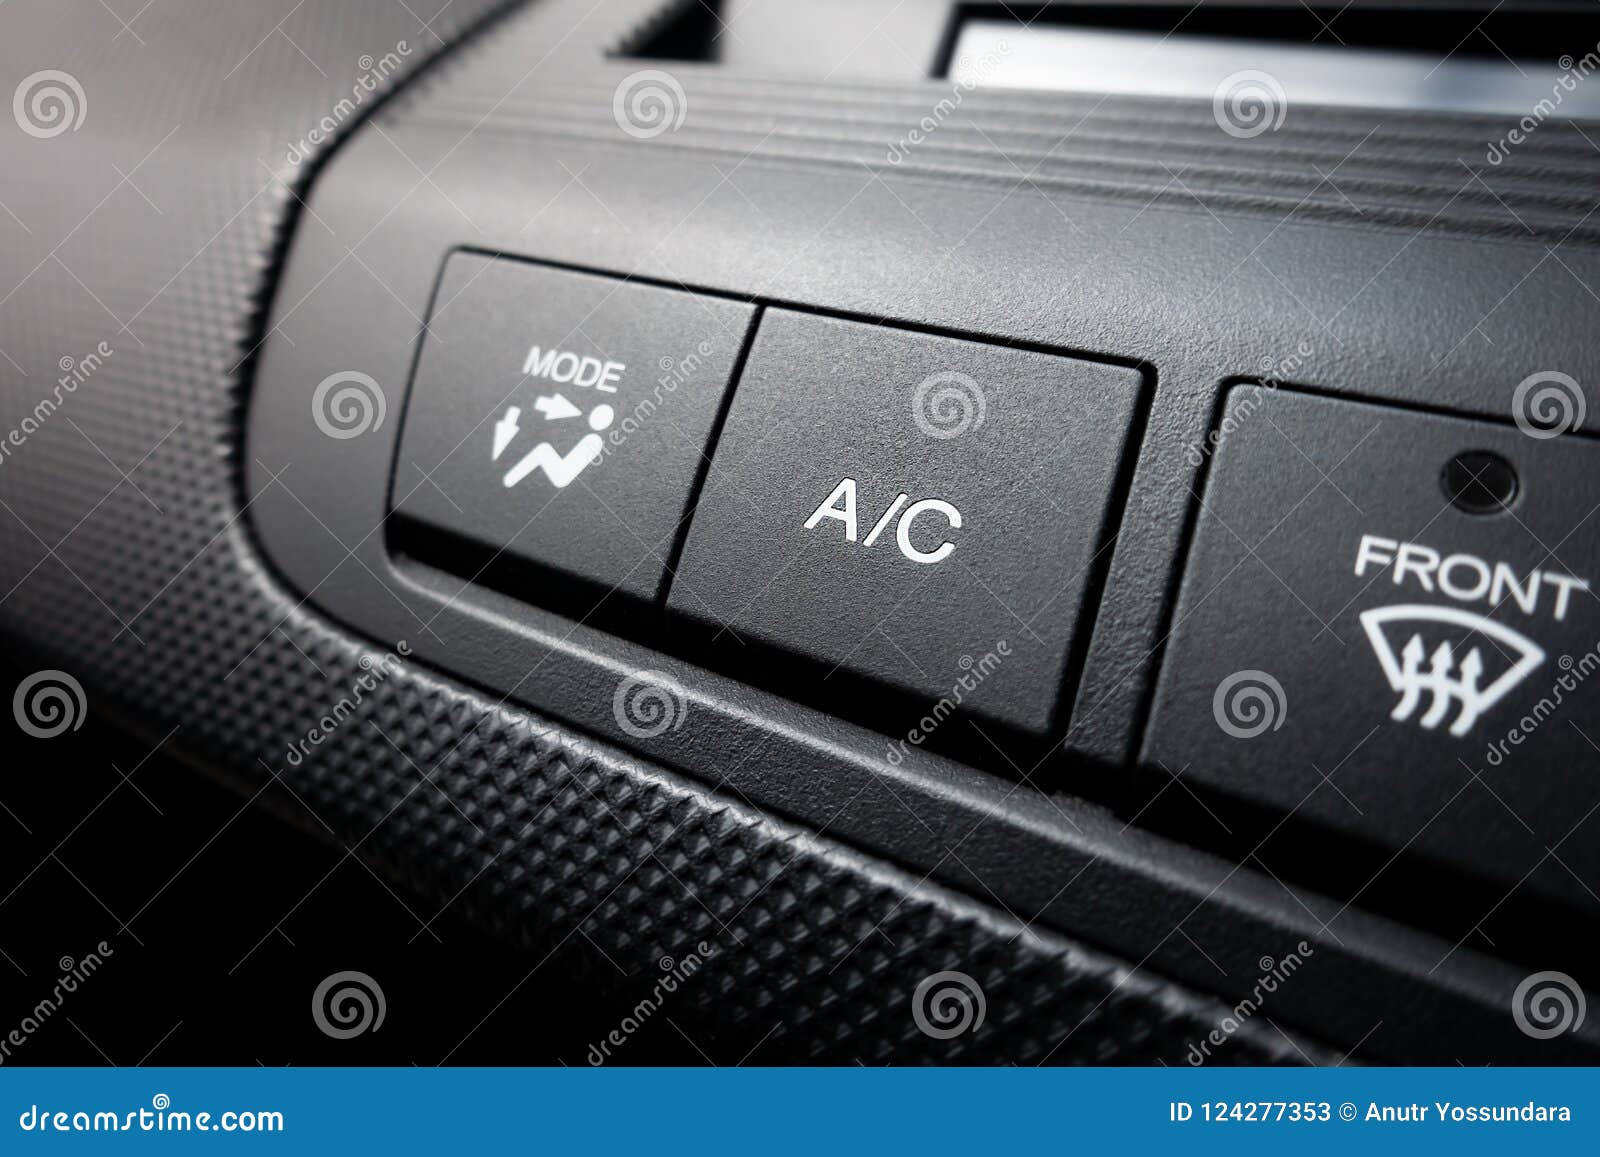 aircon on off power switch of a car air conditioning